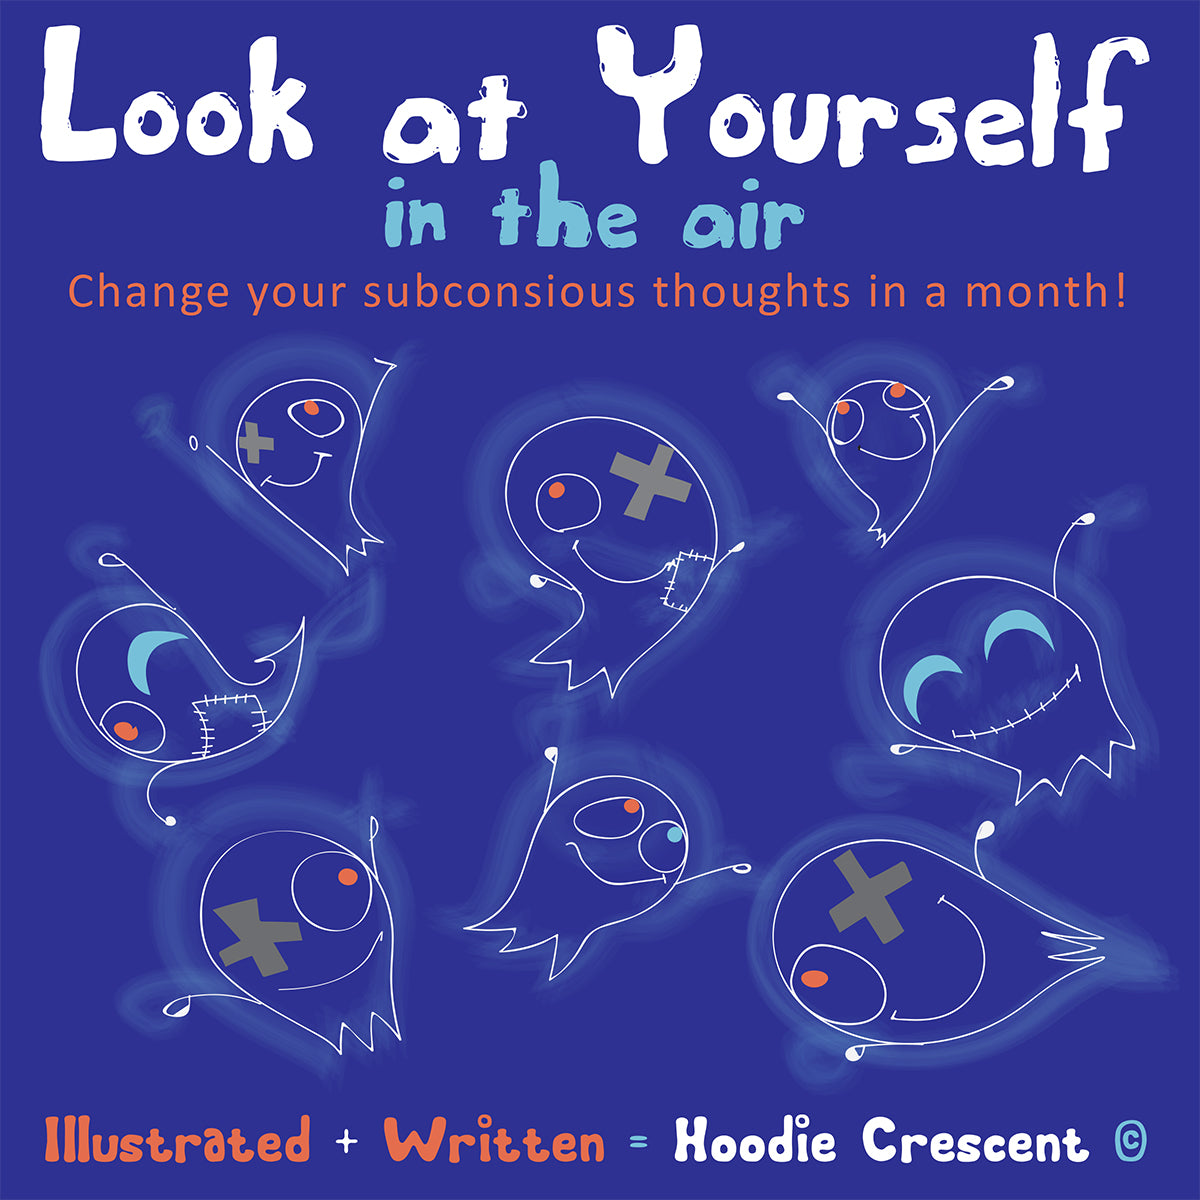 Look at Yourself in the Air! PDF - Download File